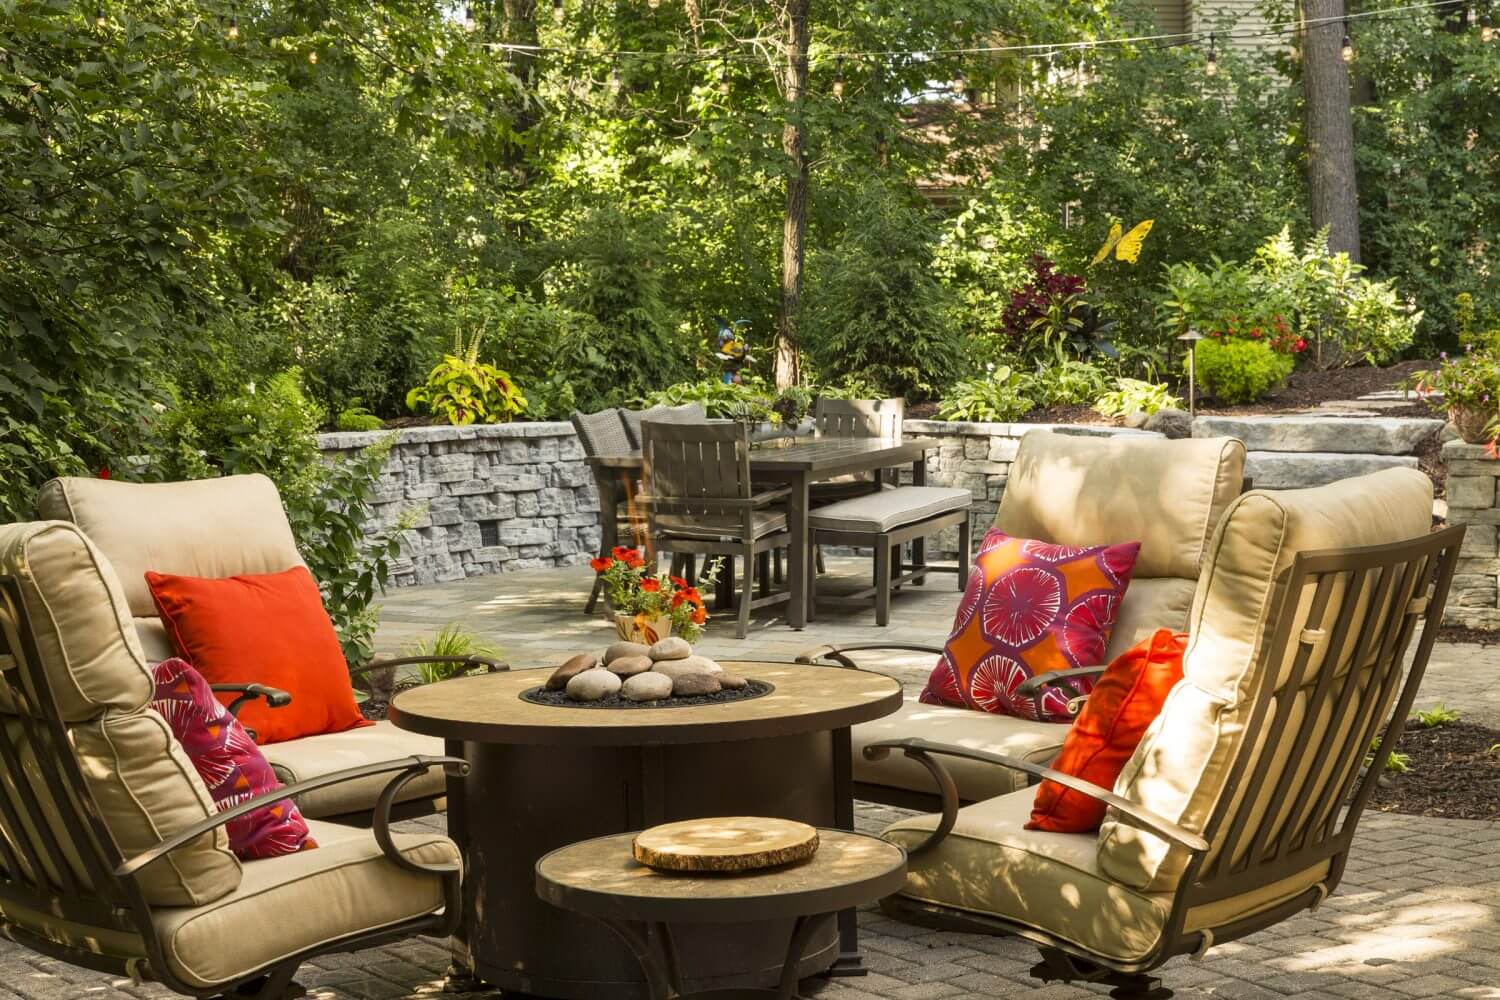 4 Backyard Design Trends That’ll Make All the Difference - Ispiri